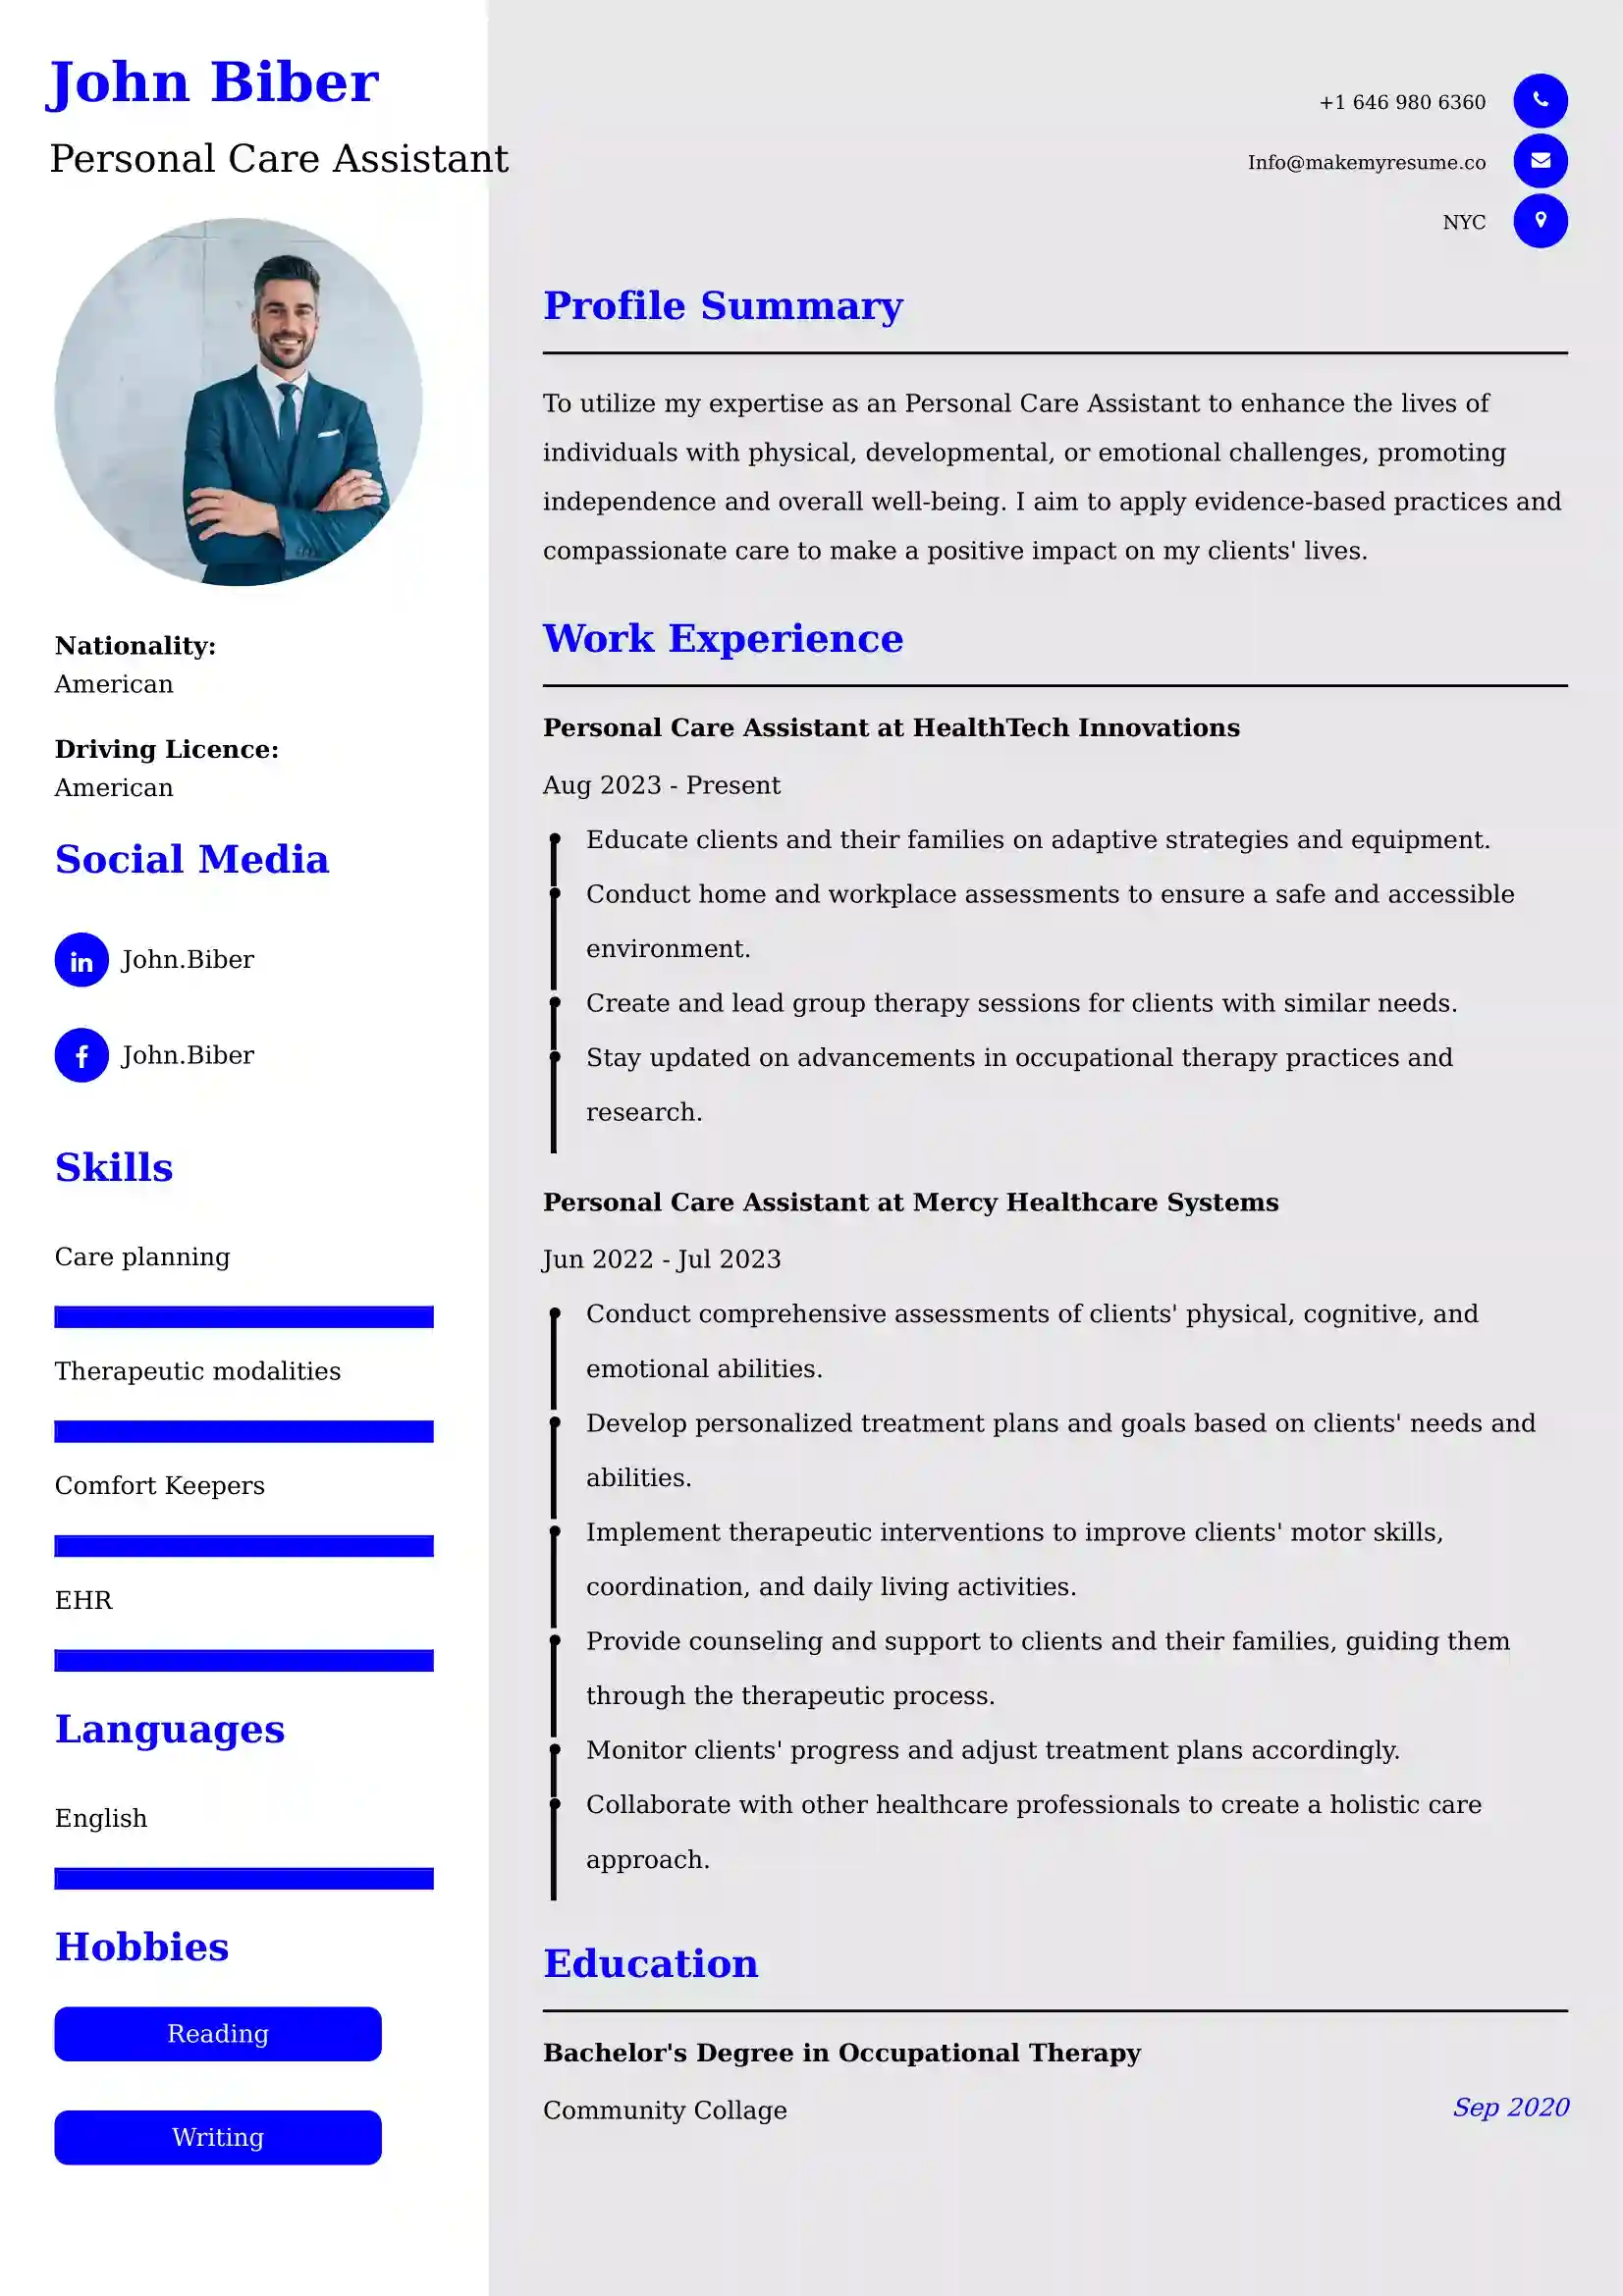 Personal Care Assistant Resume Examples - Brazilian Format, Latest Template